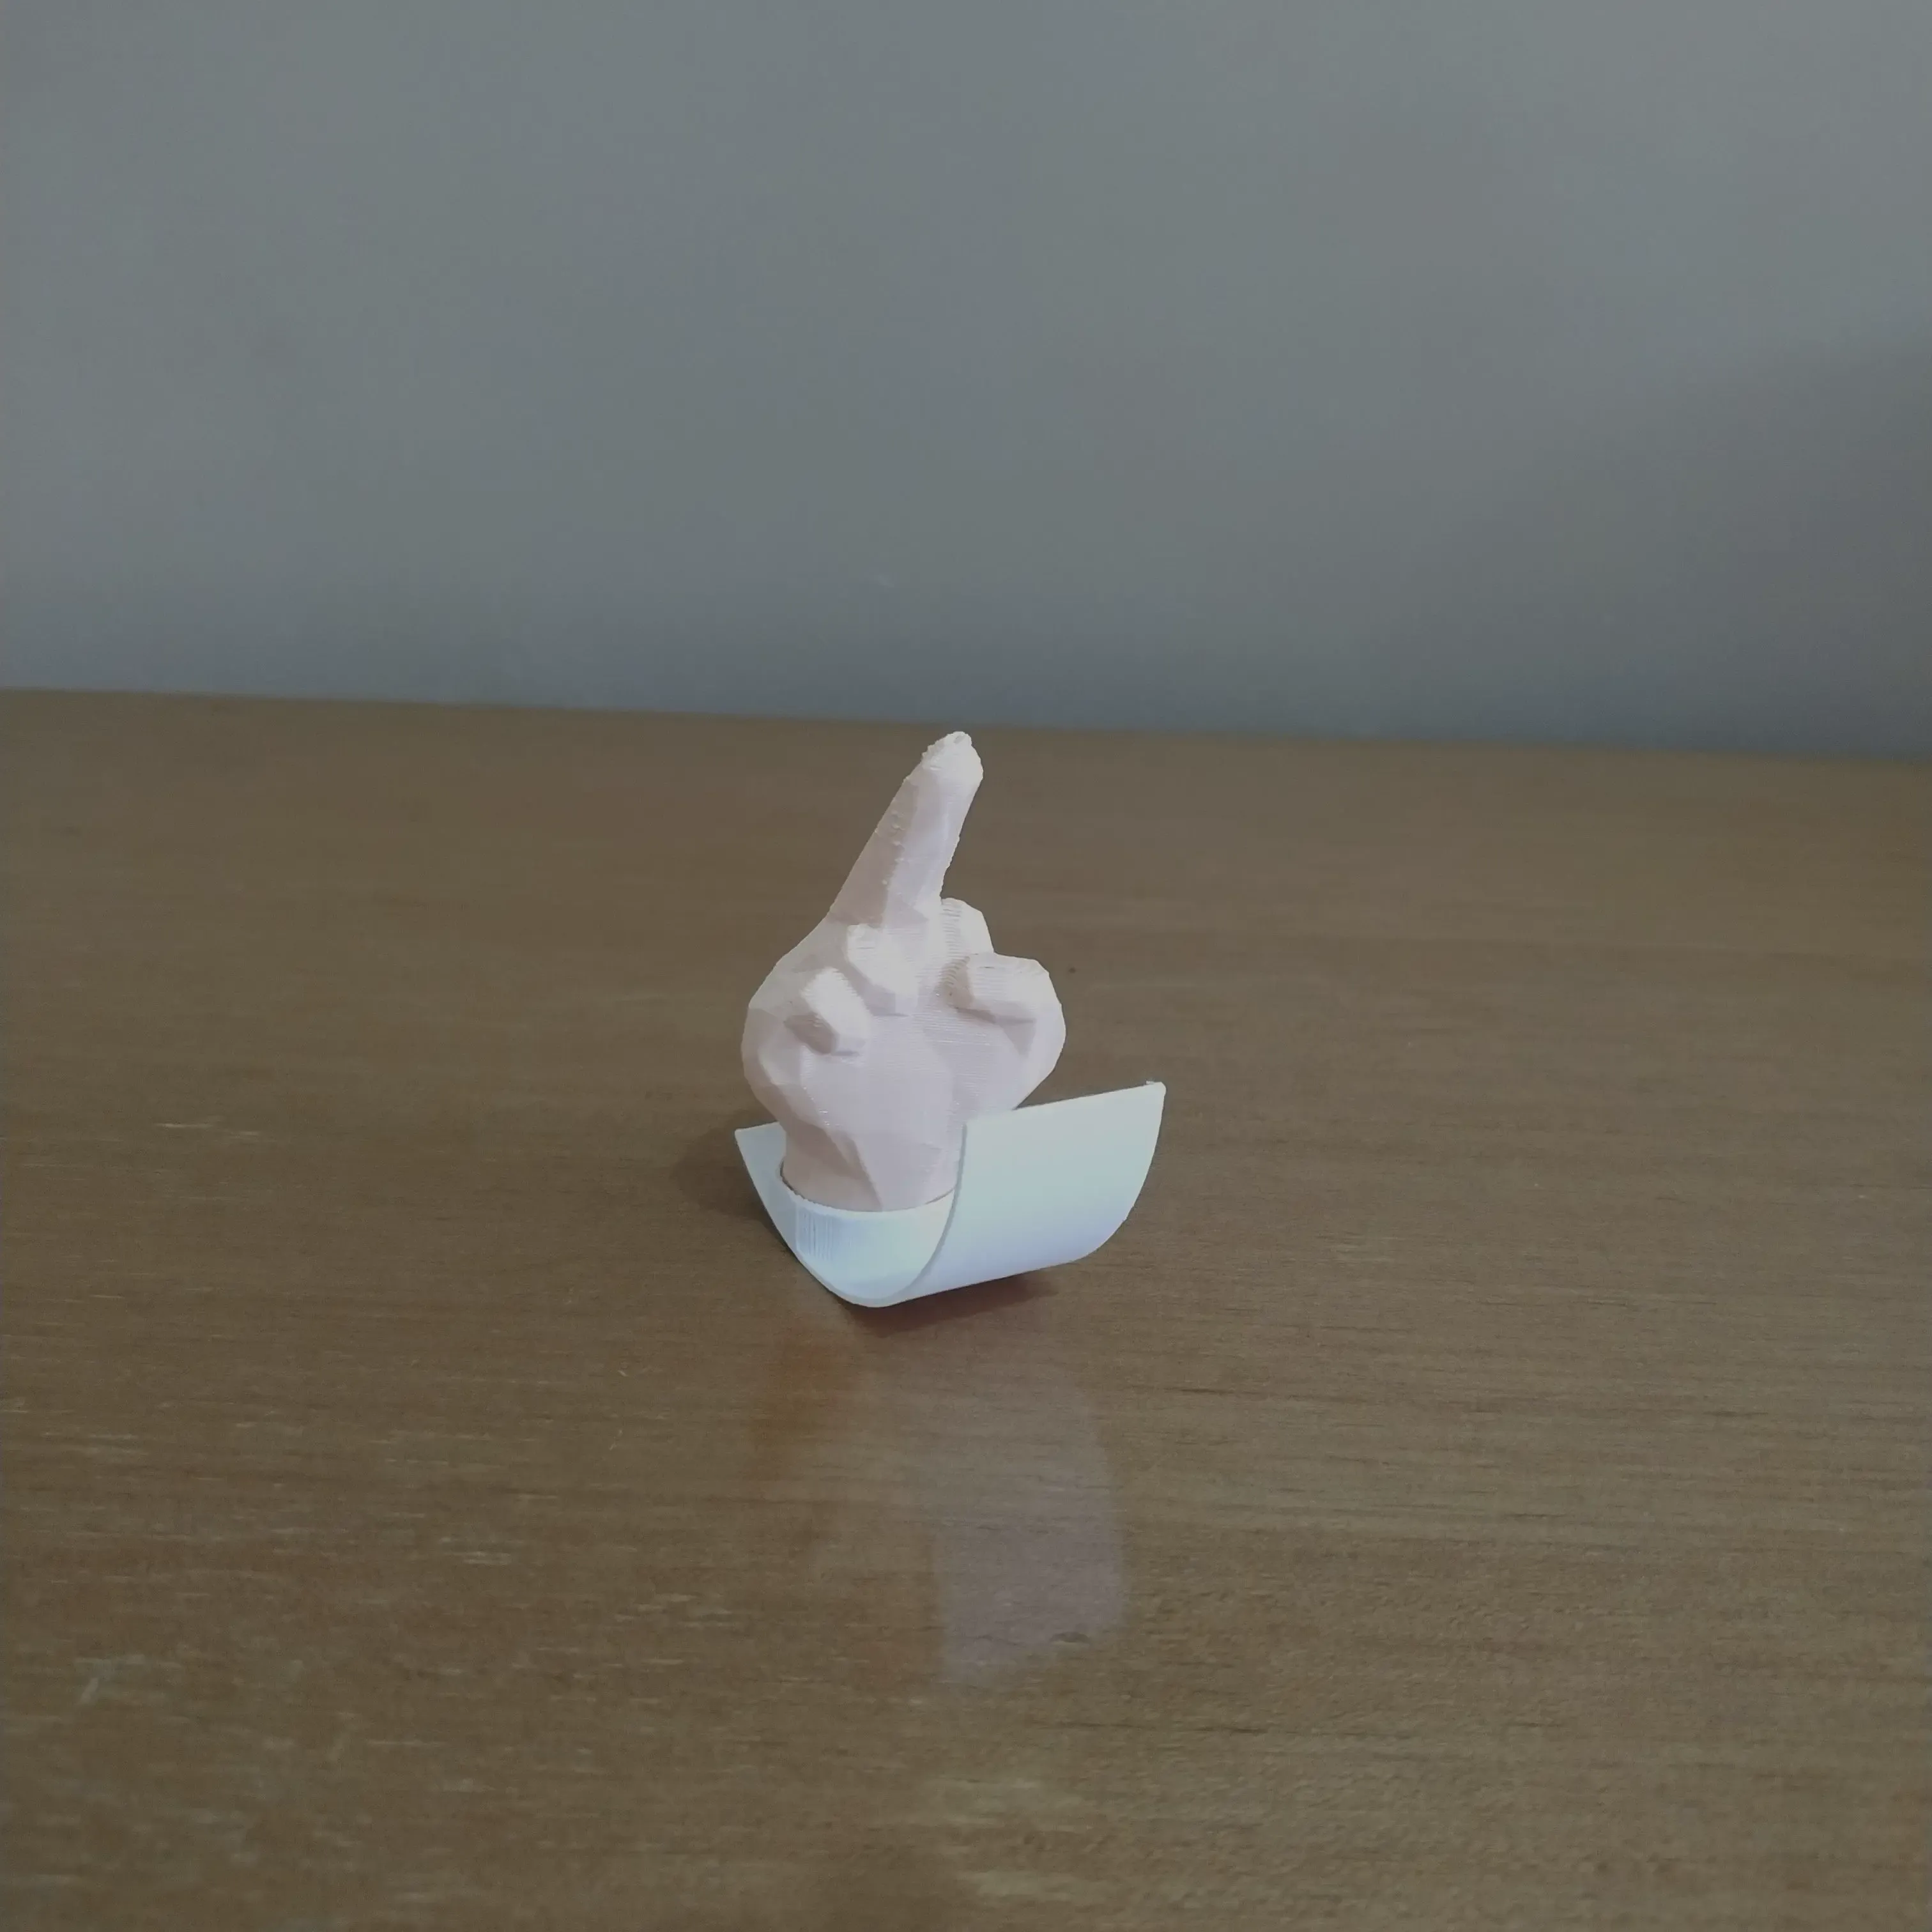 MIDDLE FINGER FUCK LOW POLY